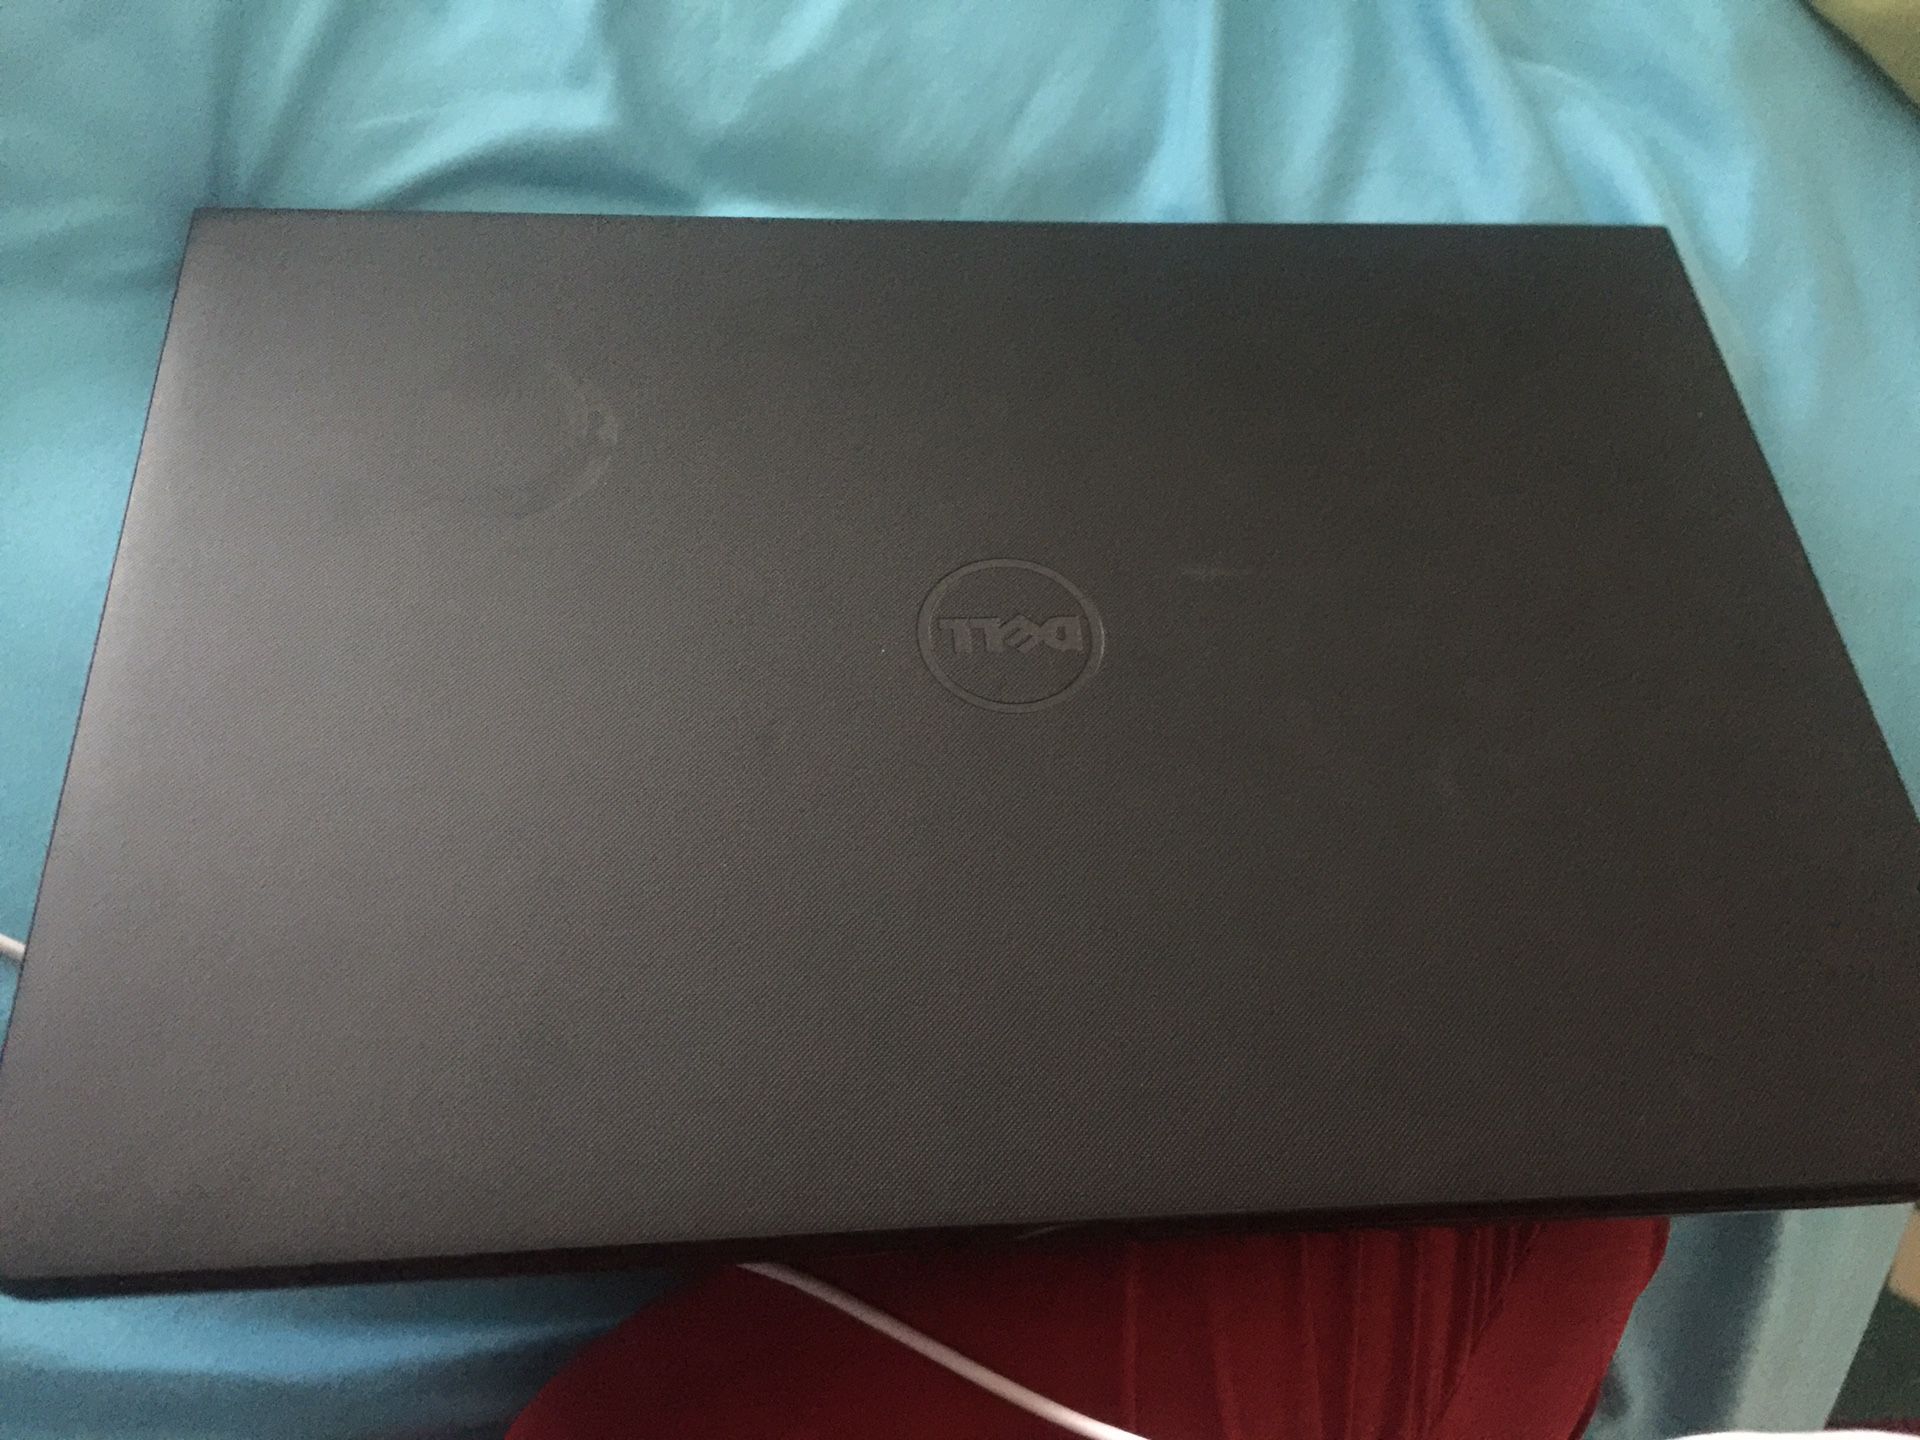 Dell 15 inch laptop